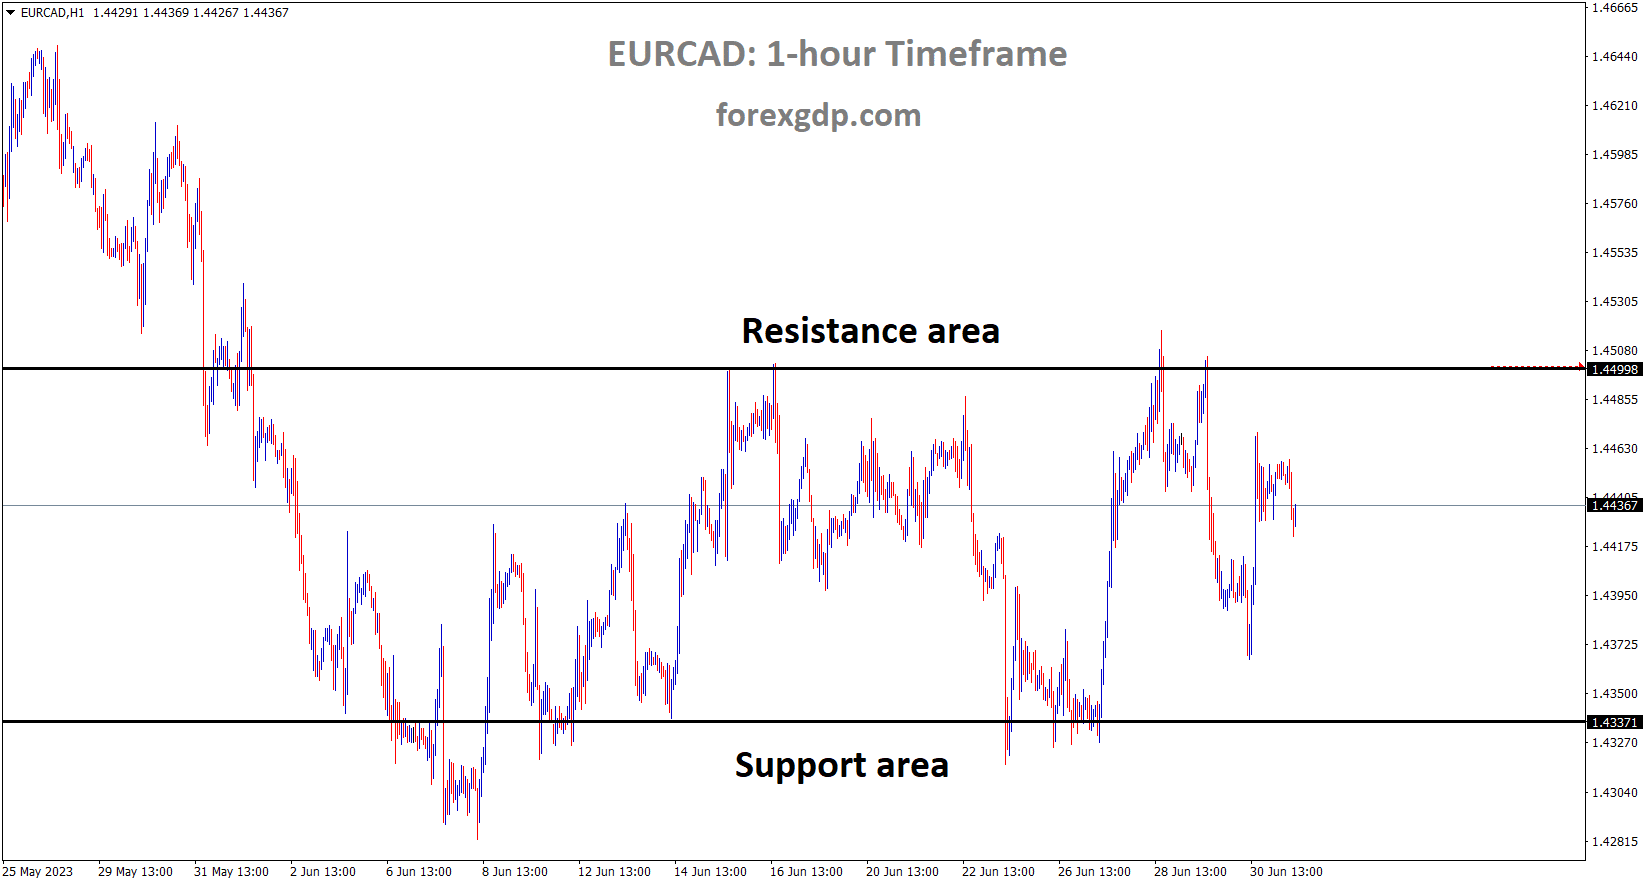 EURCAD is moving in the Box pattern and the market has fallen from the resistance area of the pattern